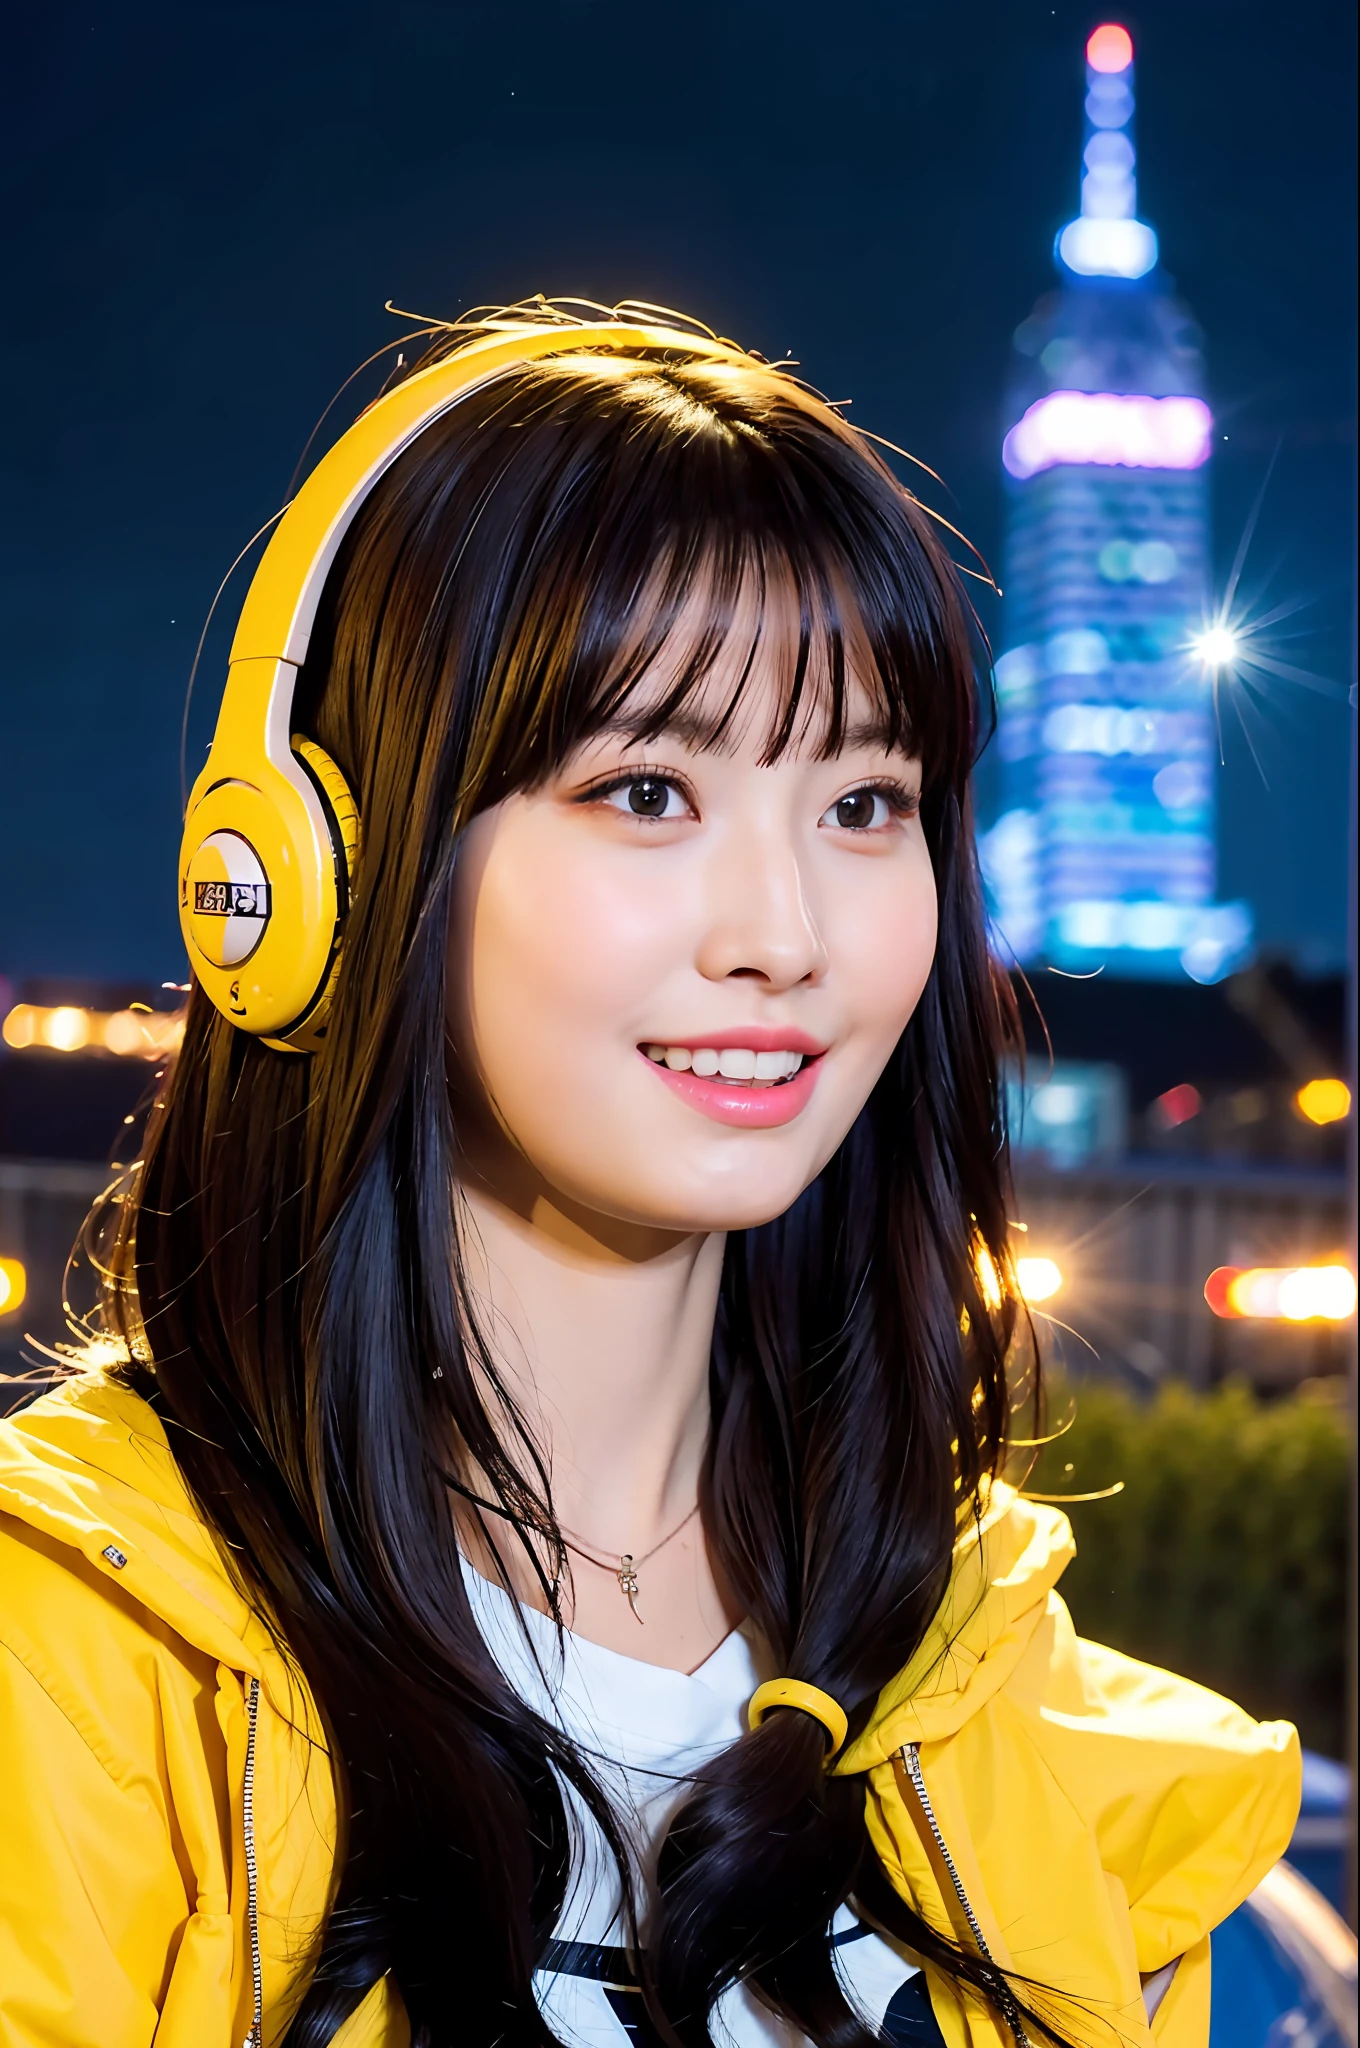 (Realistic:1.2), 18yo Girl, headphones Outfit, yellow jacket, view from below, (city:1.4), (starry sky:1.1) , (neon lights, sparkle, lightning:1.1)